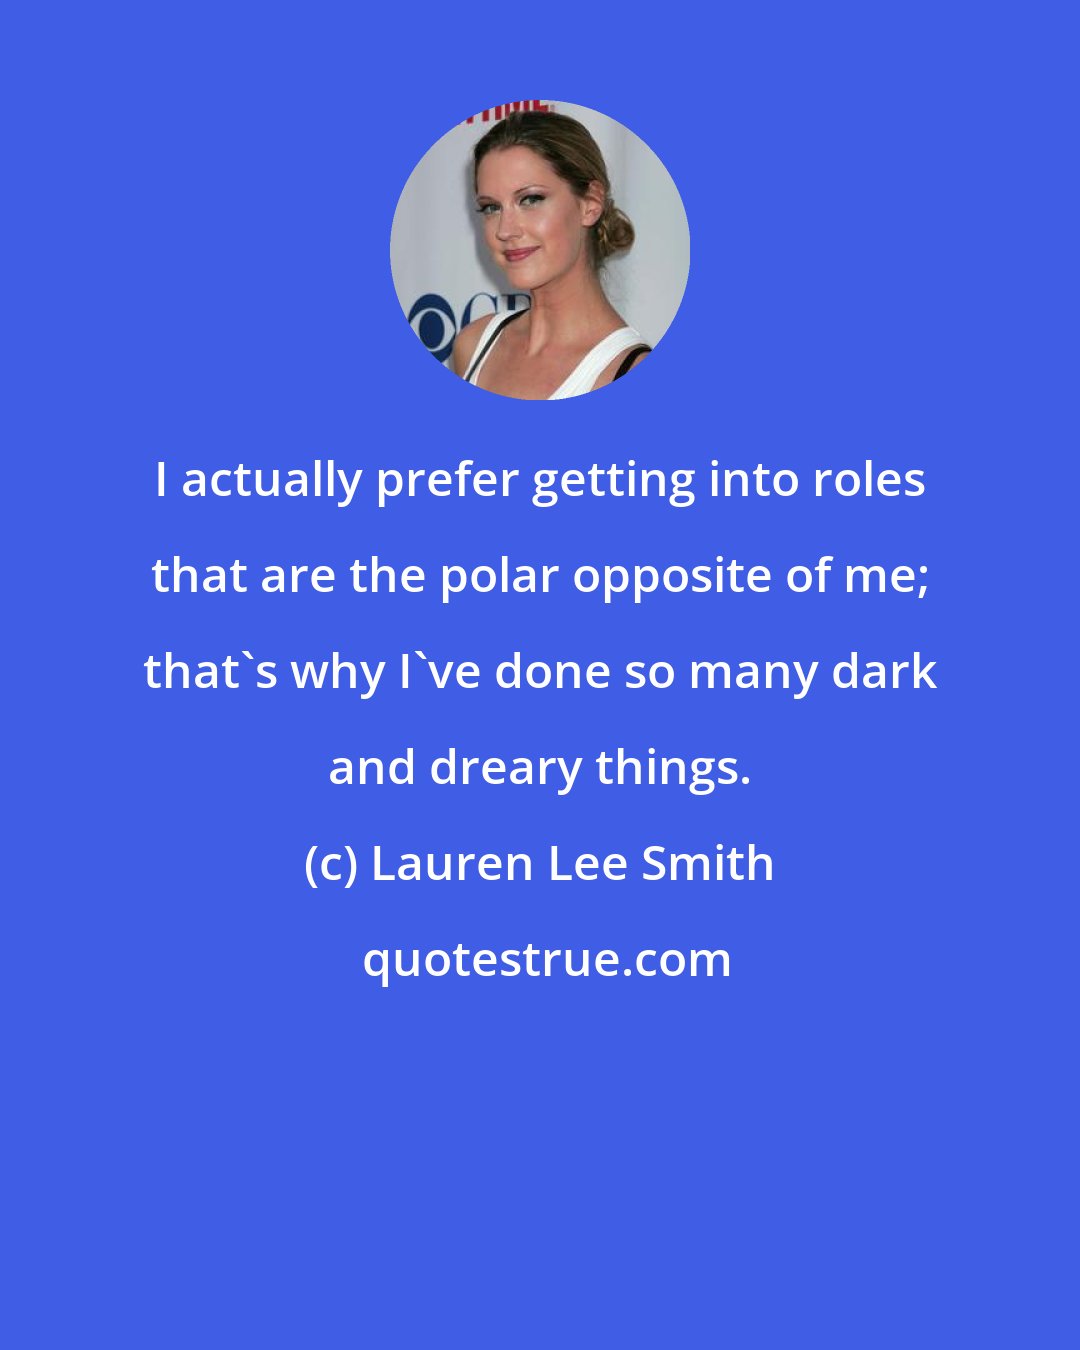 Lauren Lee Smith: I actually prefer getting into roles that are the polar opposite of me; that's why I've done so many dark and dreary things.